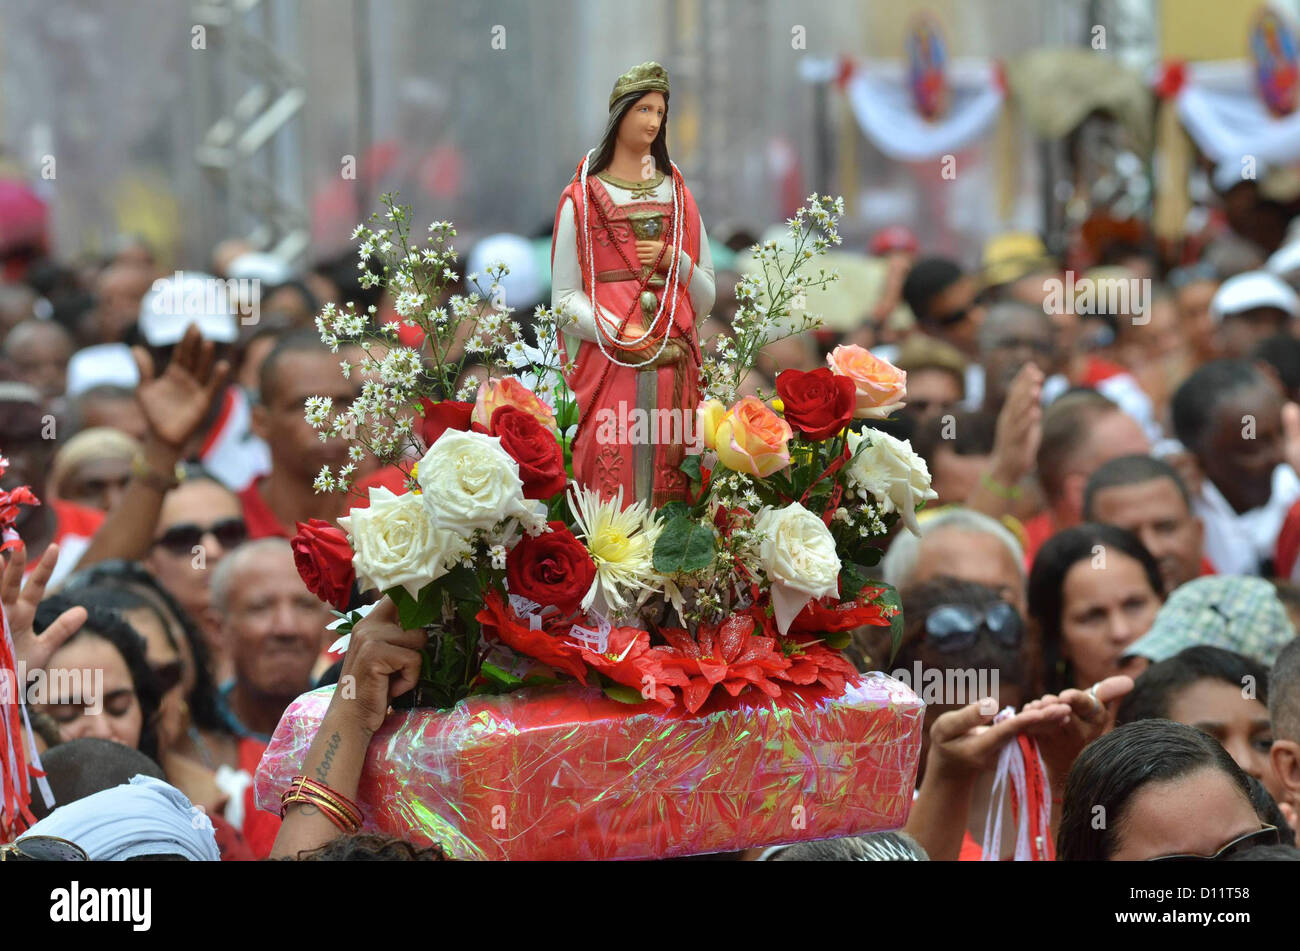 Devotees take part in a procession celebrating Saint Barbara, as part of a cycle of religious festivities in Salvador, Bahia state, in northeastern Brazil, on December 4, 2012. Photo: ERIK SALLES/BAPRESS Stock Photo